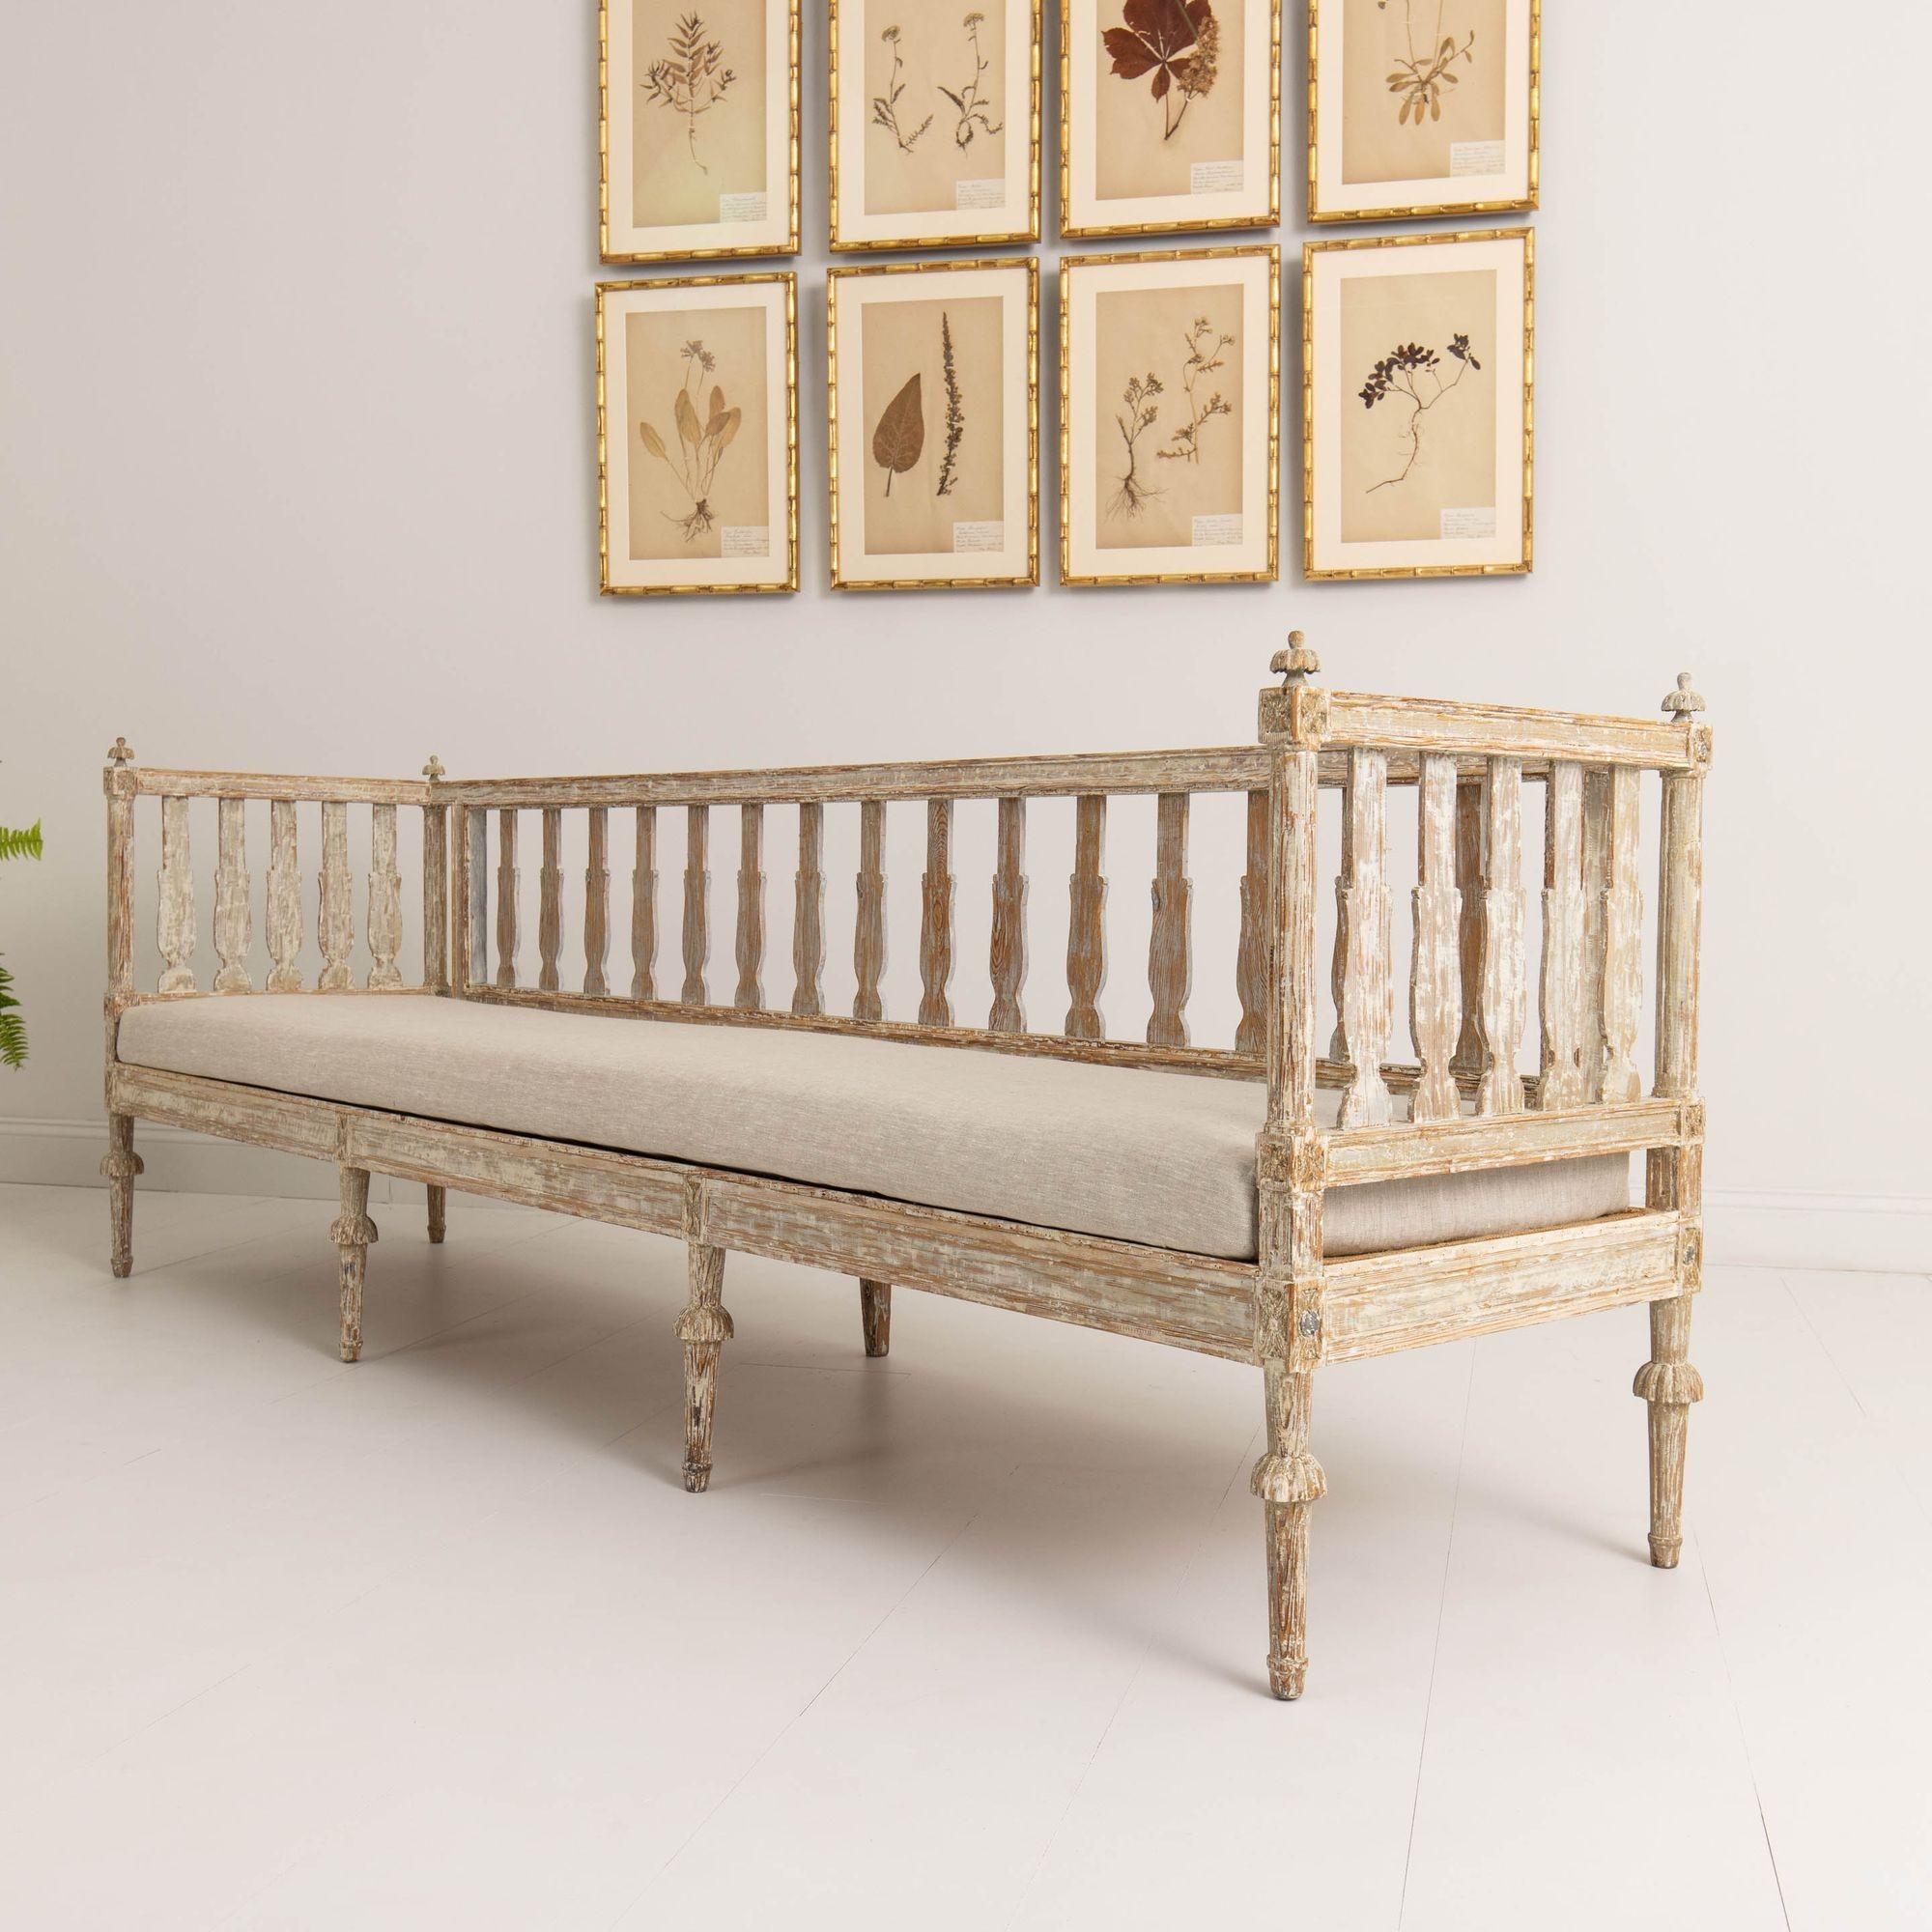 19th c. Swedish Gustavian Period Sofa Bench in Original Paint For Sale 11